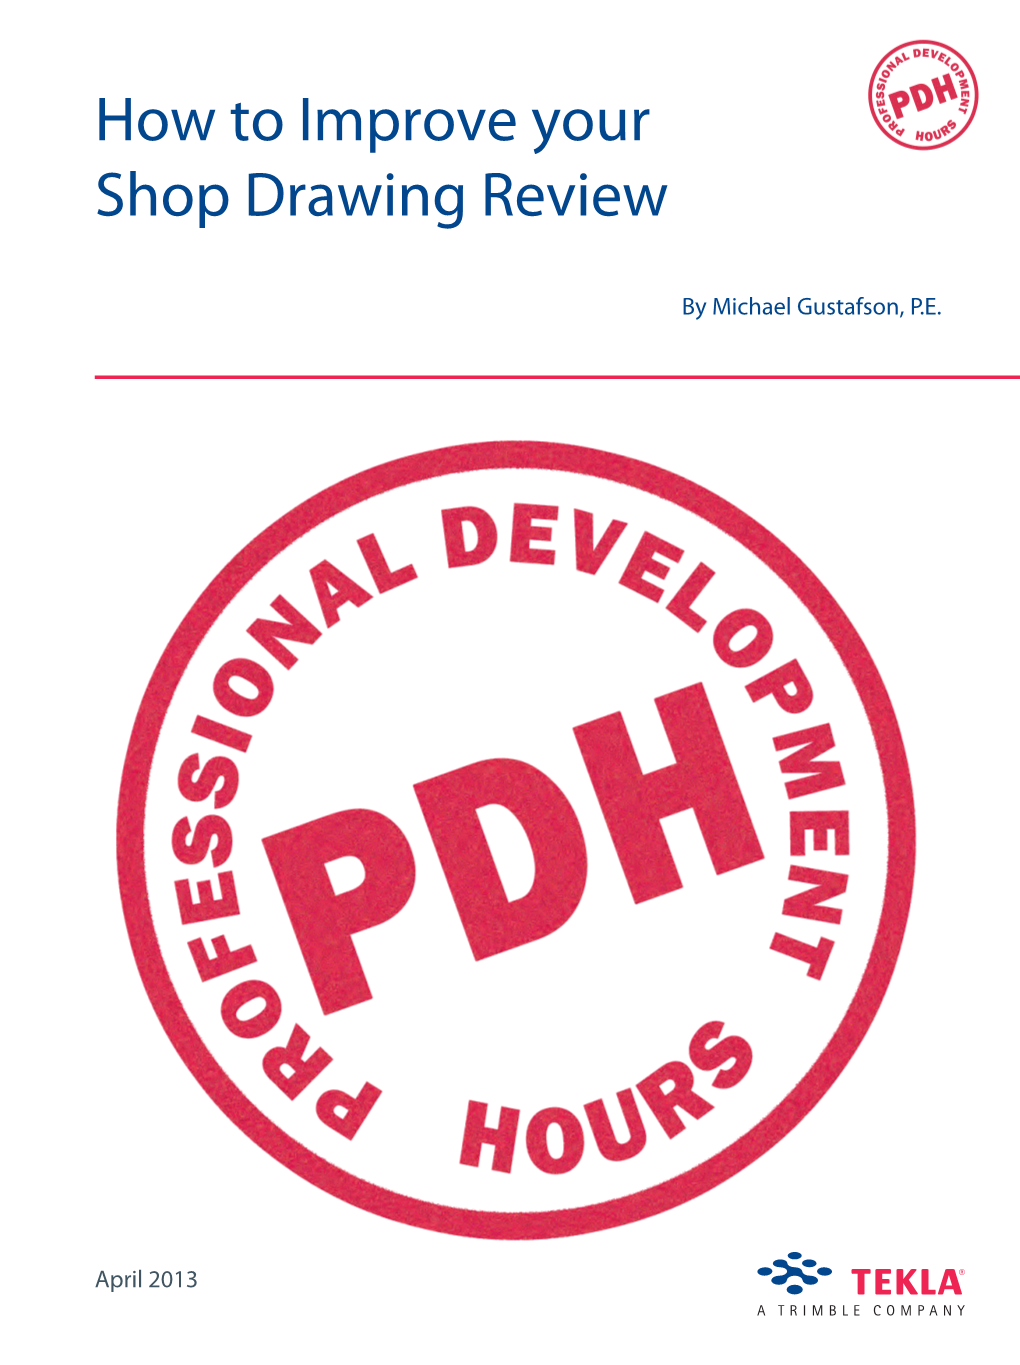 How to Improve Your Shop Drawing Review